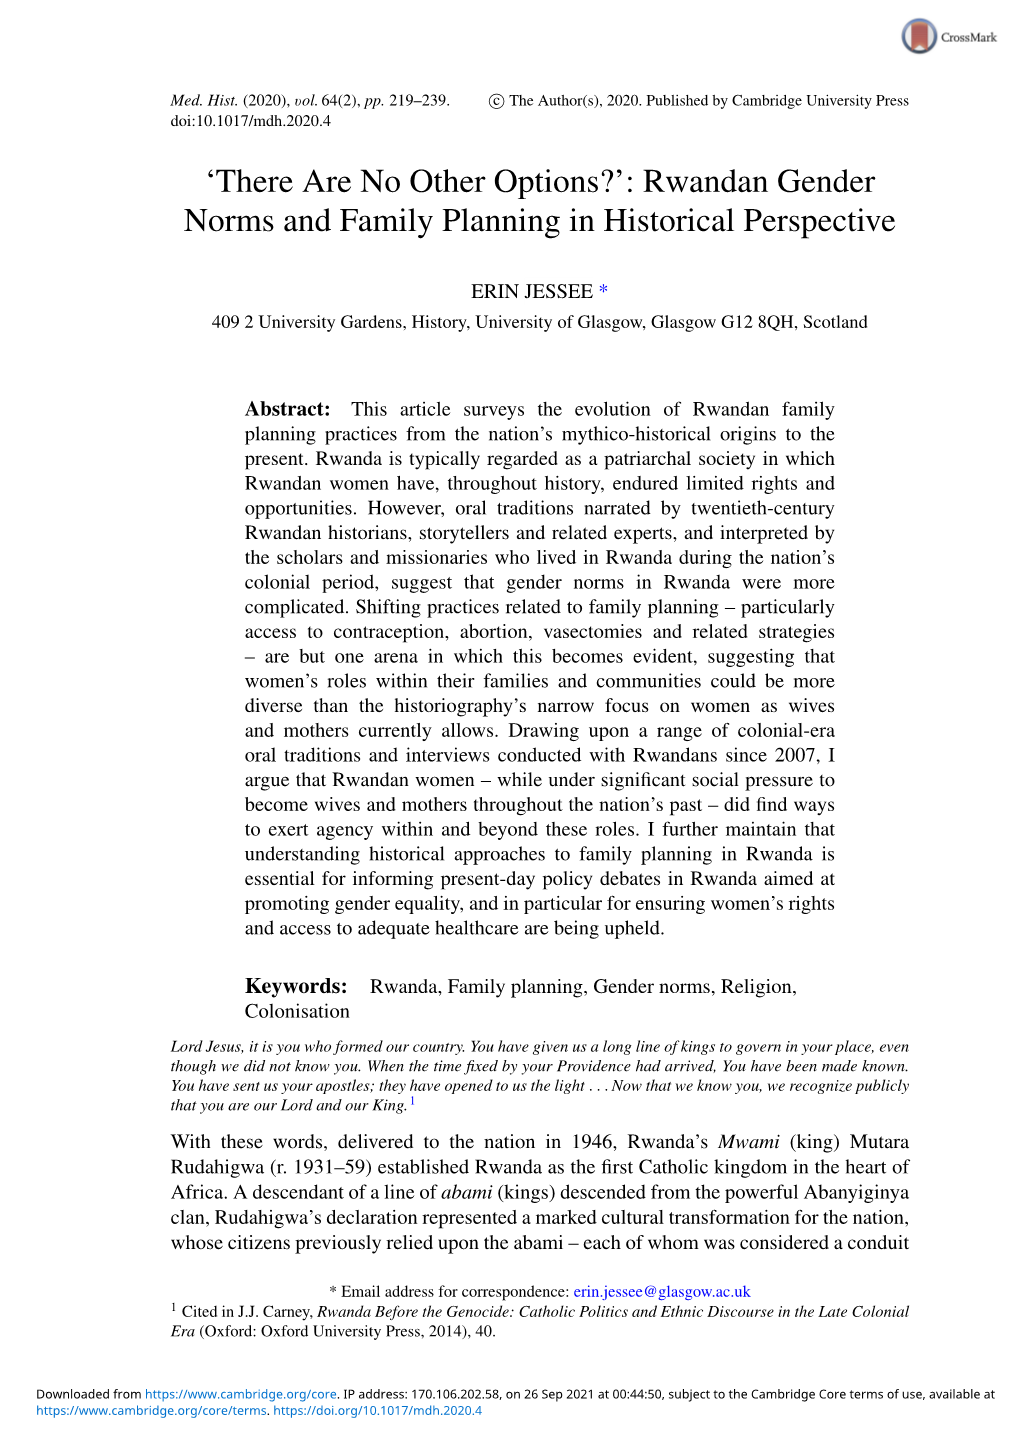 'There Are No Other Options?': Rwandan Gender Norms and Family Planning in Historical Perspective